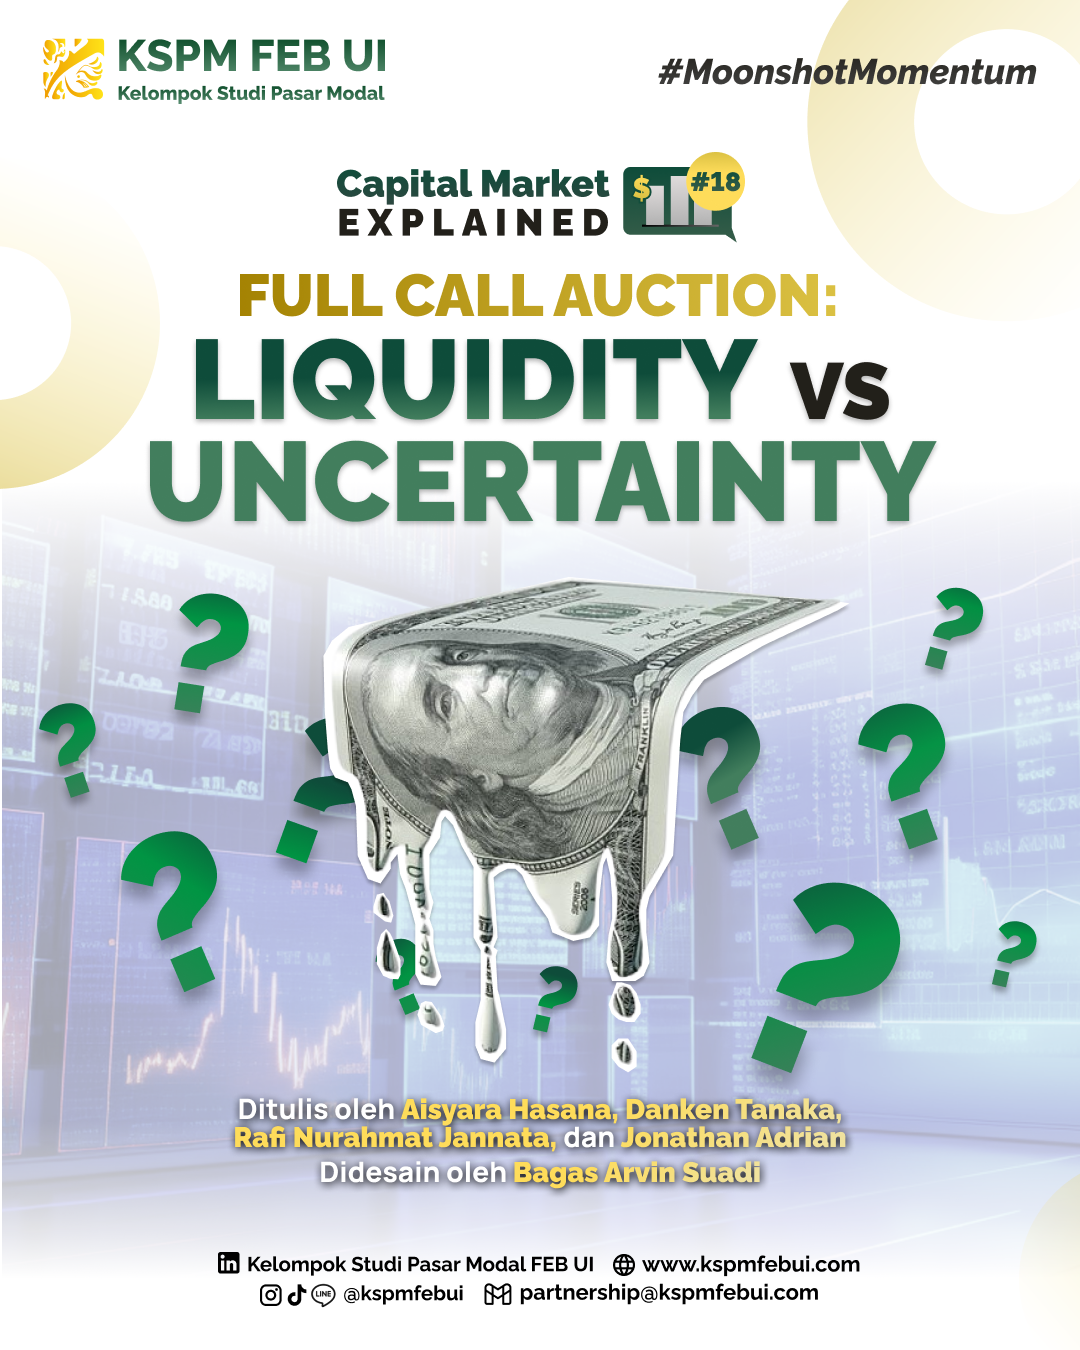 CME #18 : Full Call Auction: Liquidity vs Uncertainty